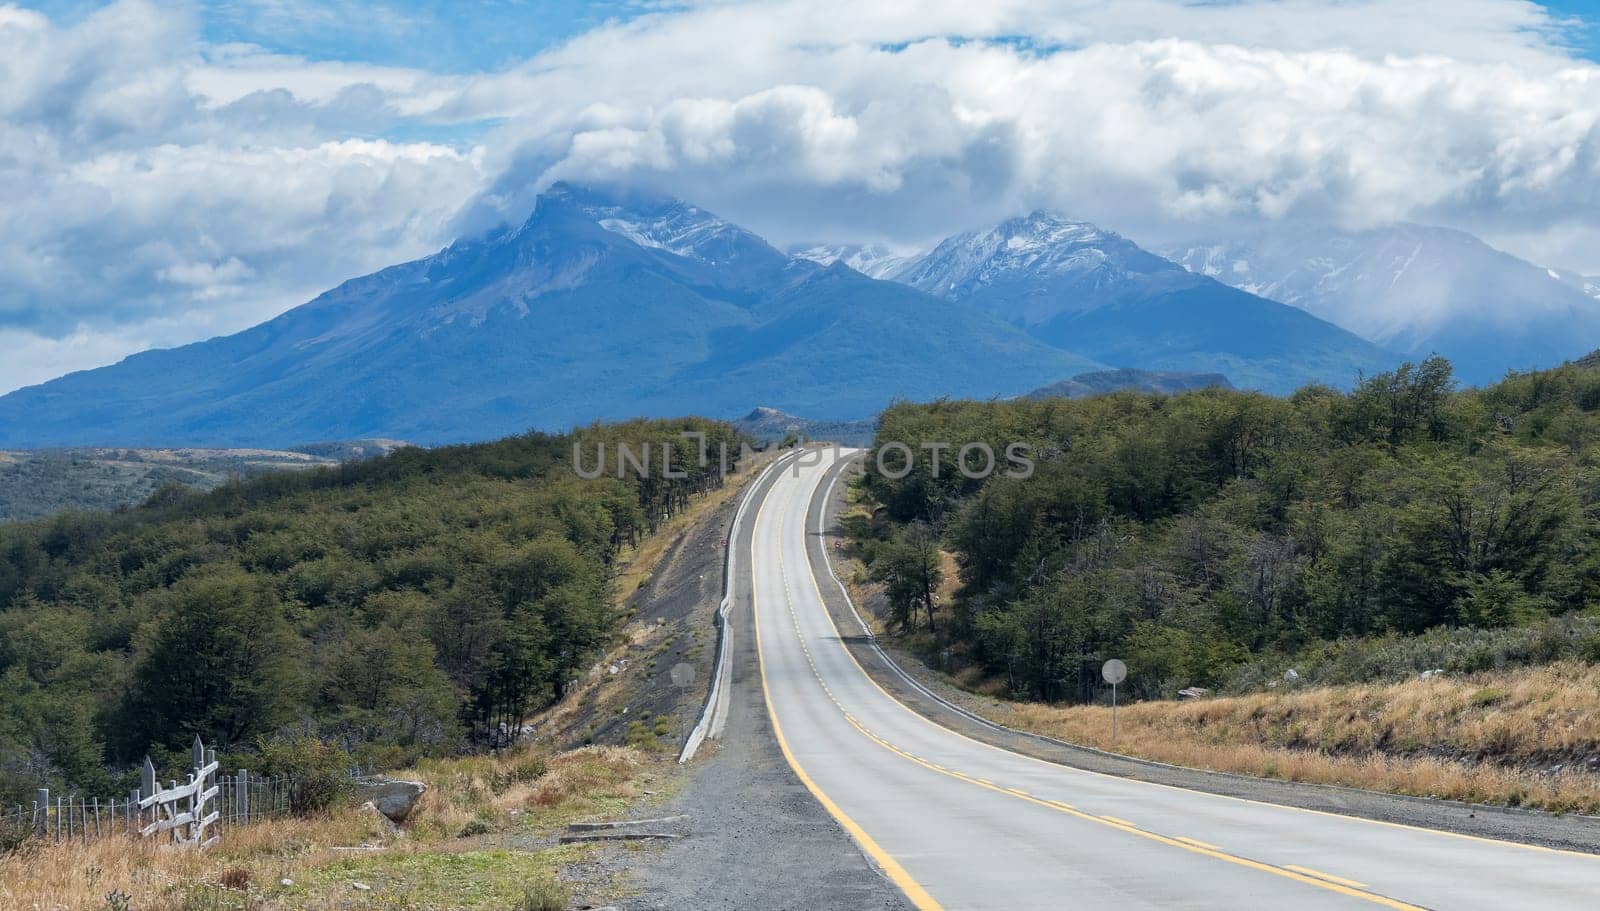 A vacant, curvy road leads to mountains under cloudy skies.